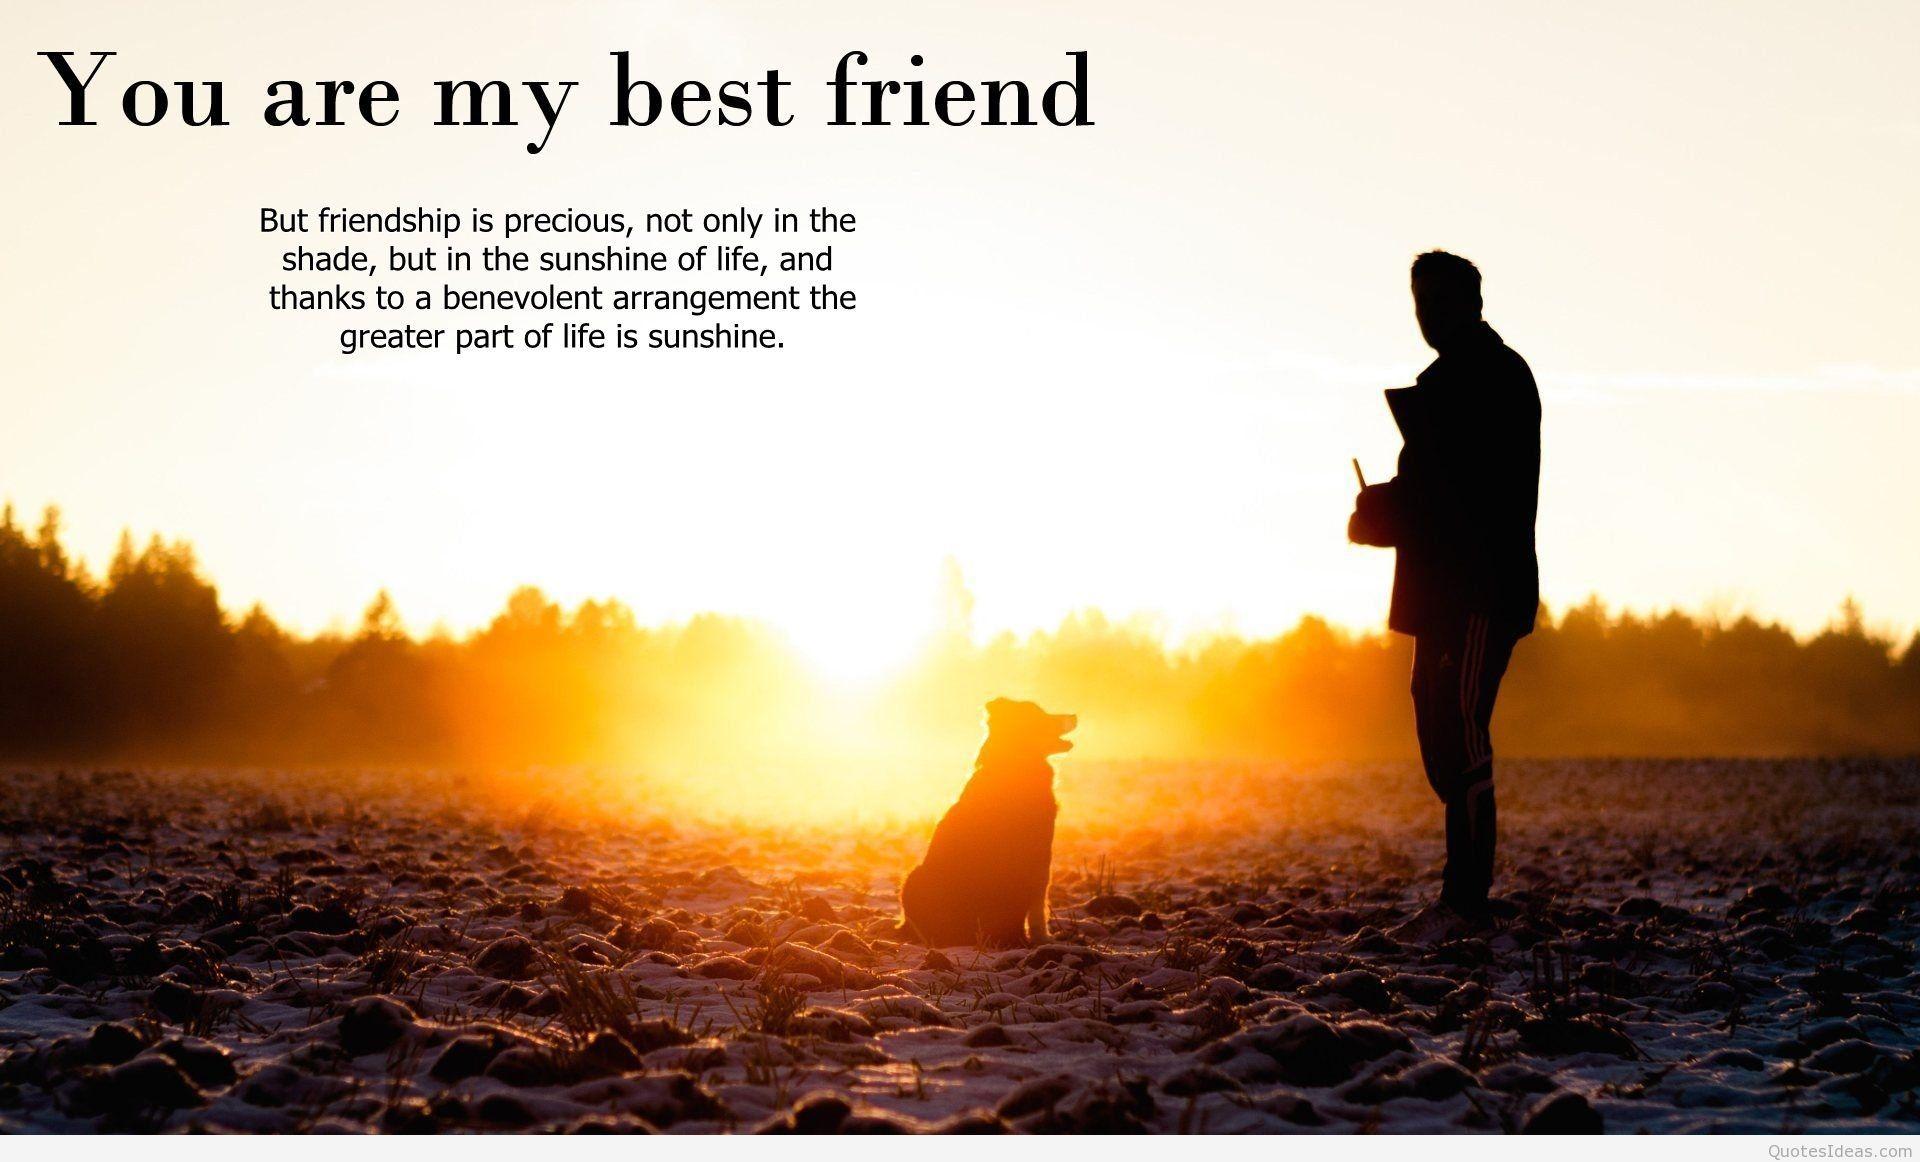 Best friends quotes and friendship quotes on wallpaper